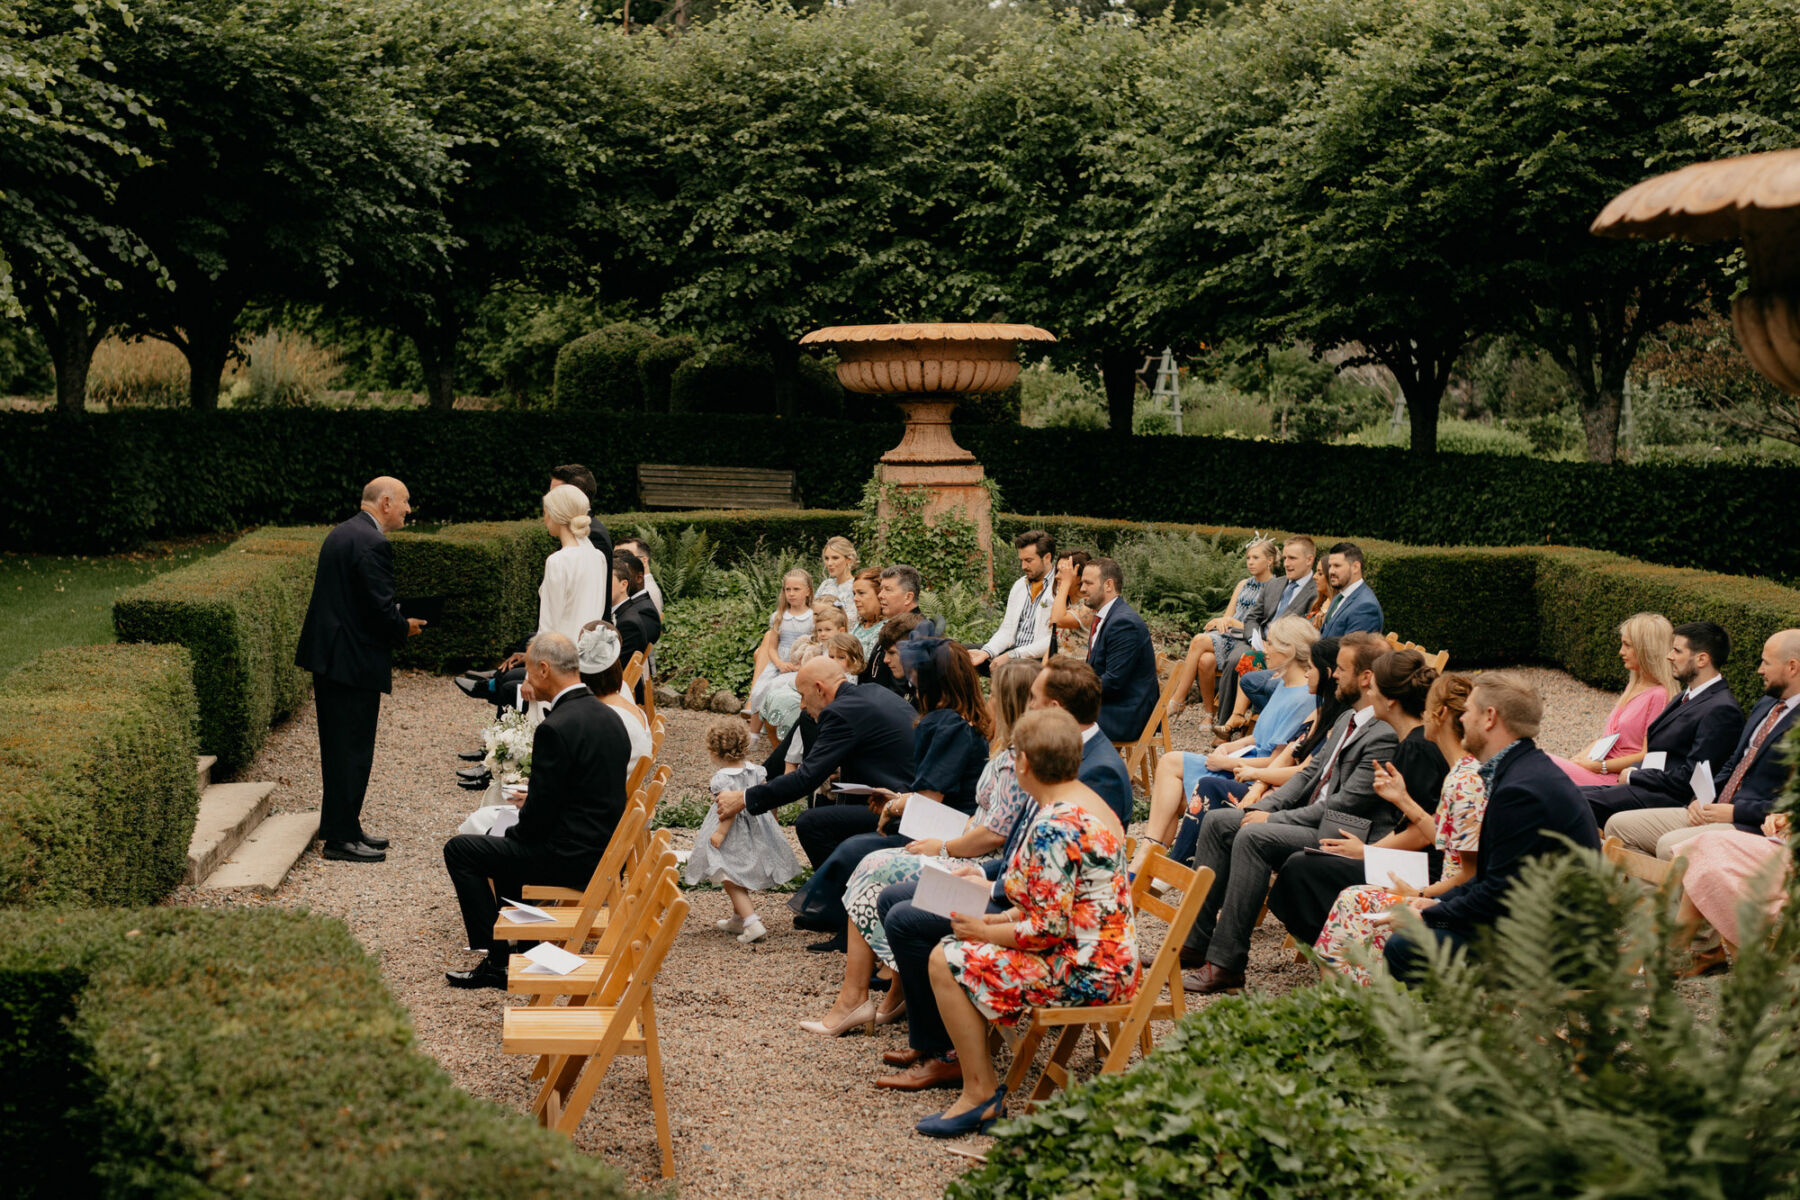 Outdoor wedding ceremony with wooden chairs at Larchfield Estate.